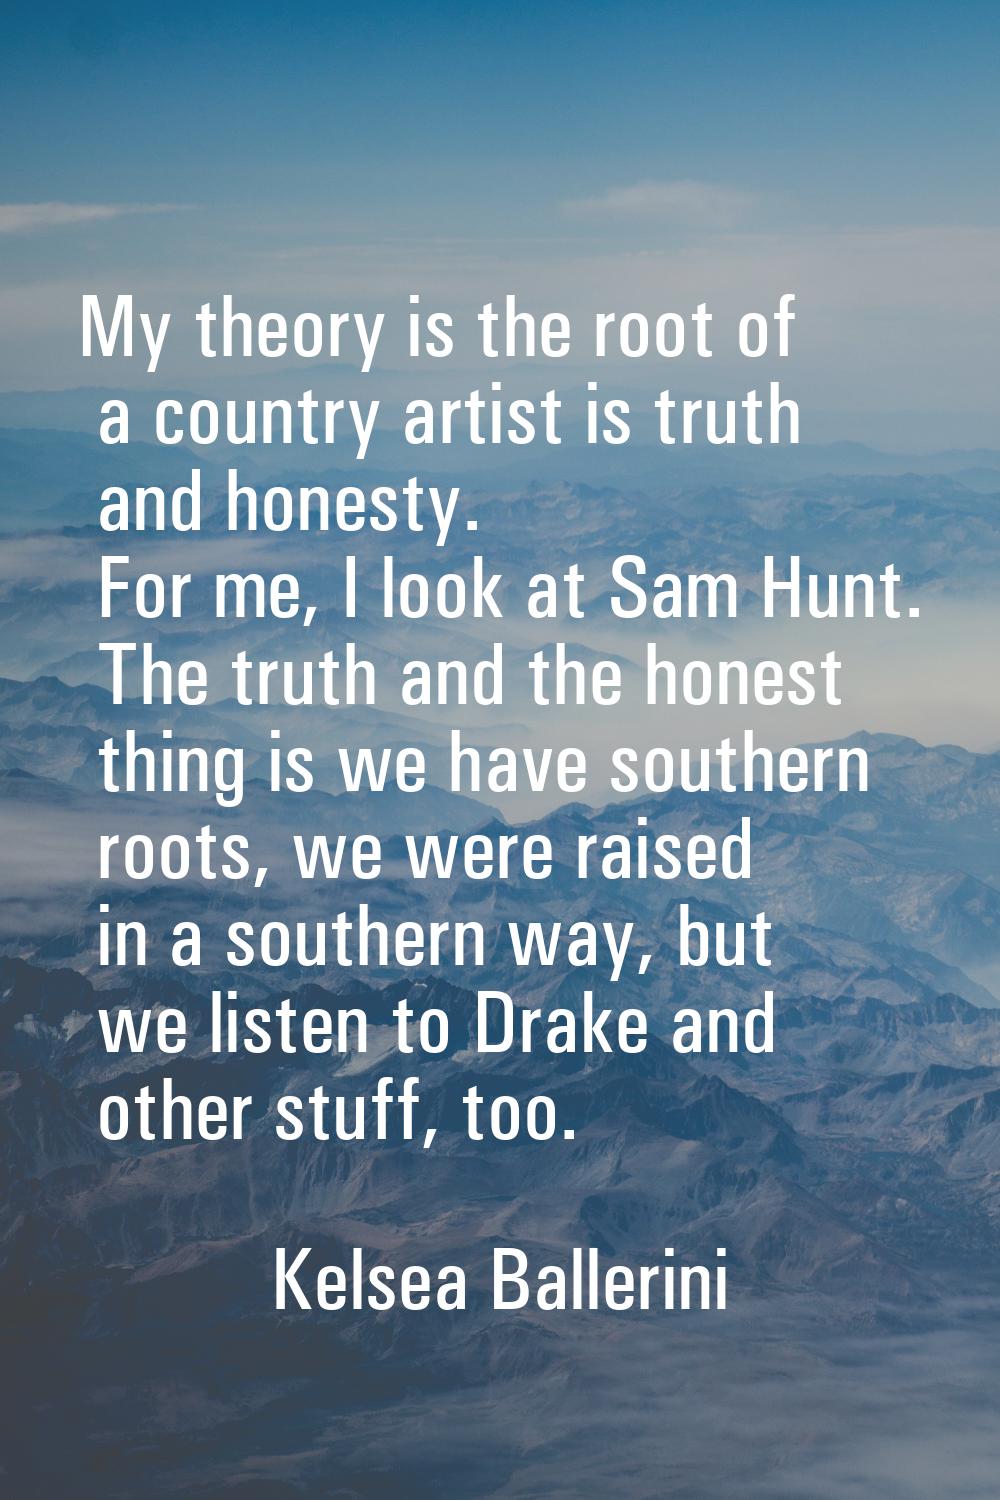 My theory is the root of a country artist is truth and honesty. For me, I look at Sam Hunt. The tru